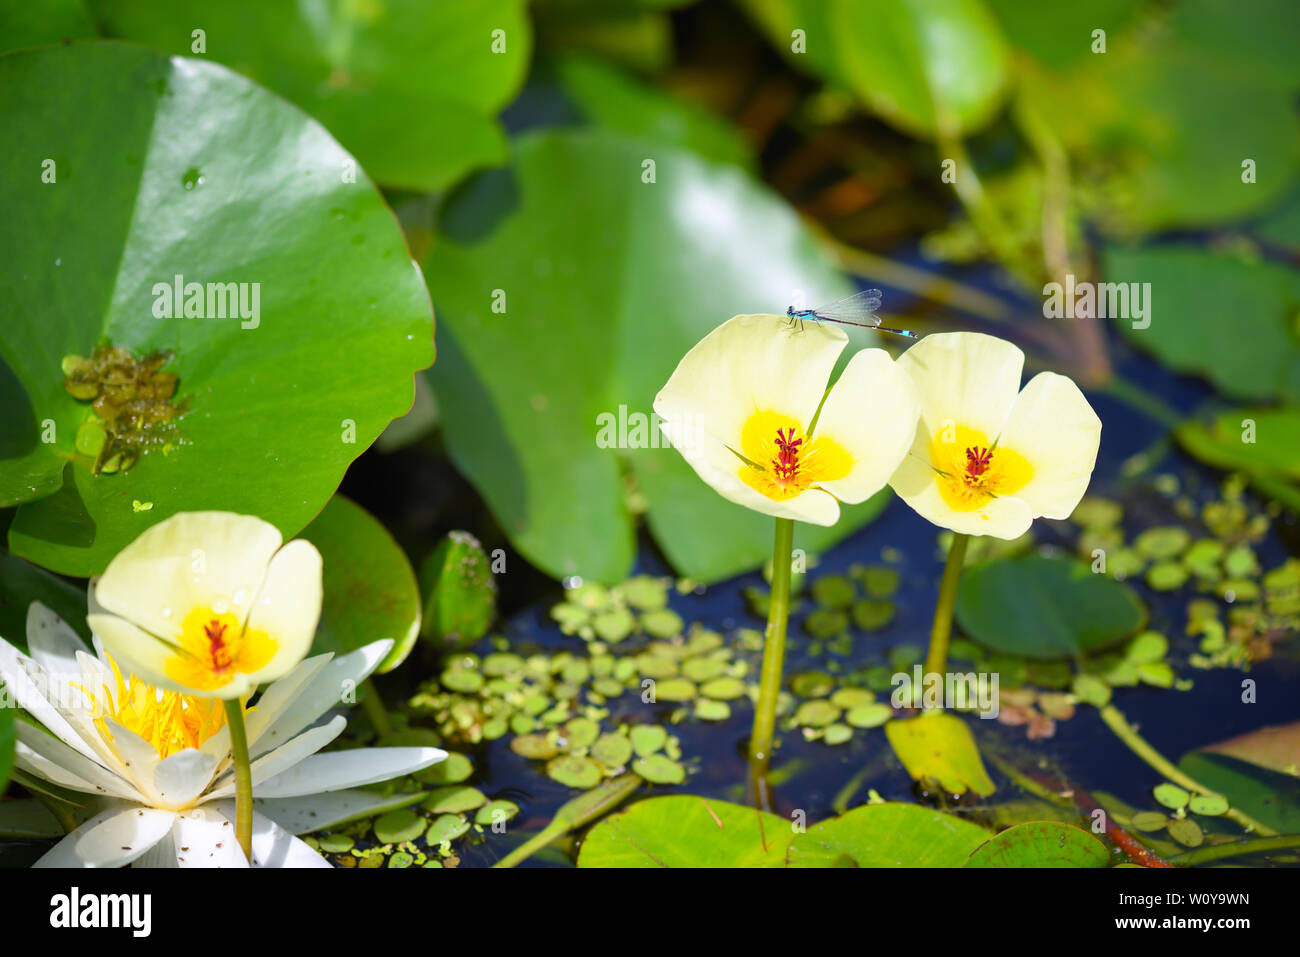 Water poppy flowers, Hydrocleys nymphoides Stock Photo